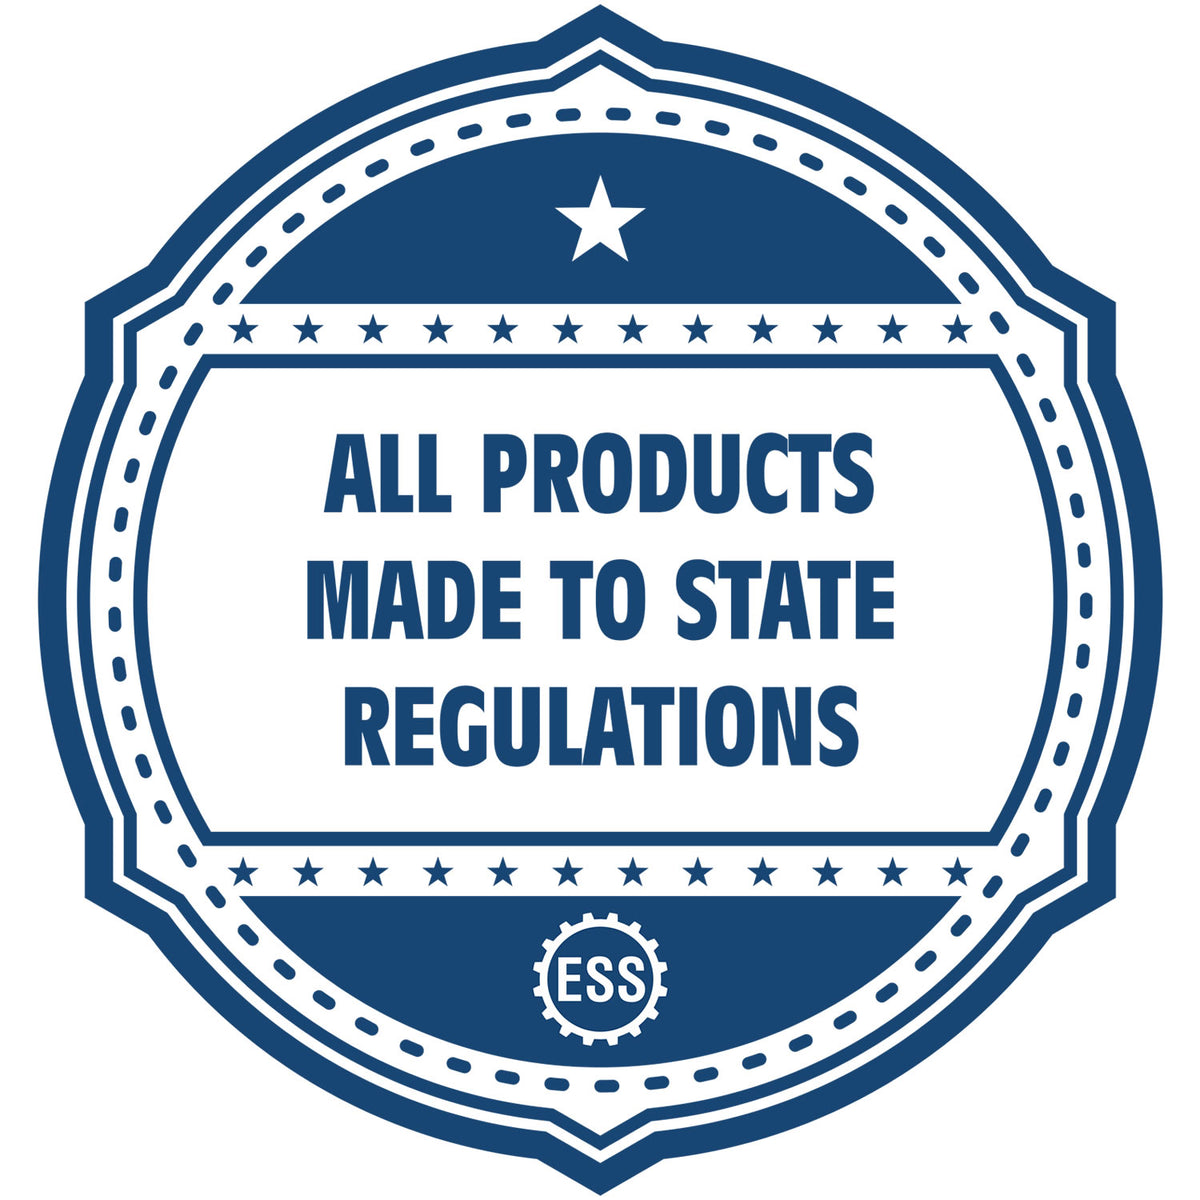 An icon or badge element for the Long Reach Nebraska PE Seal showing that this product is made in compliance with state regulations.